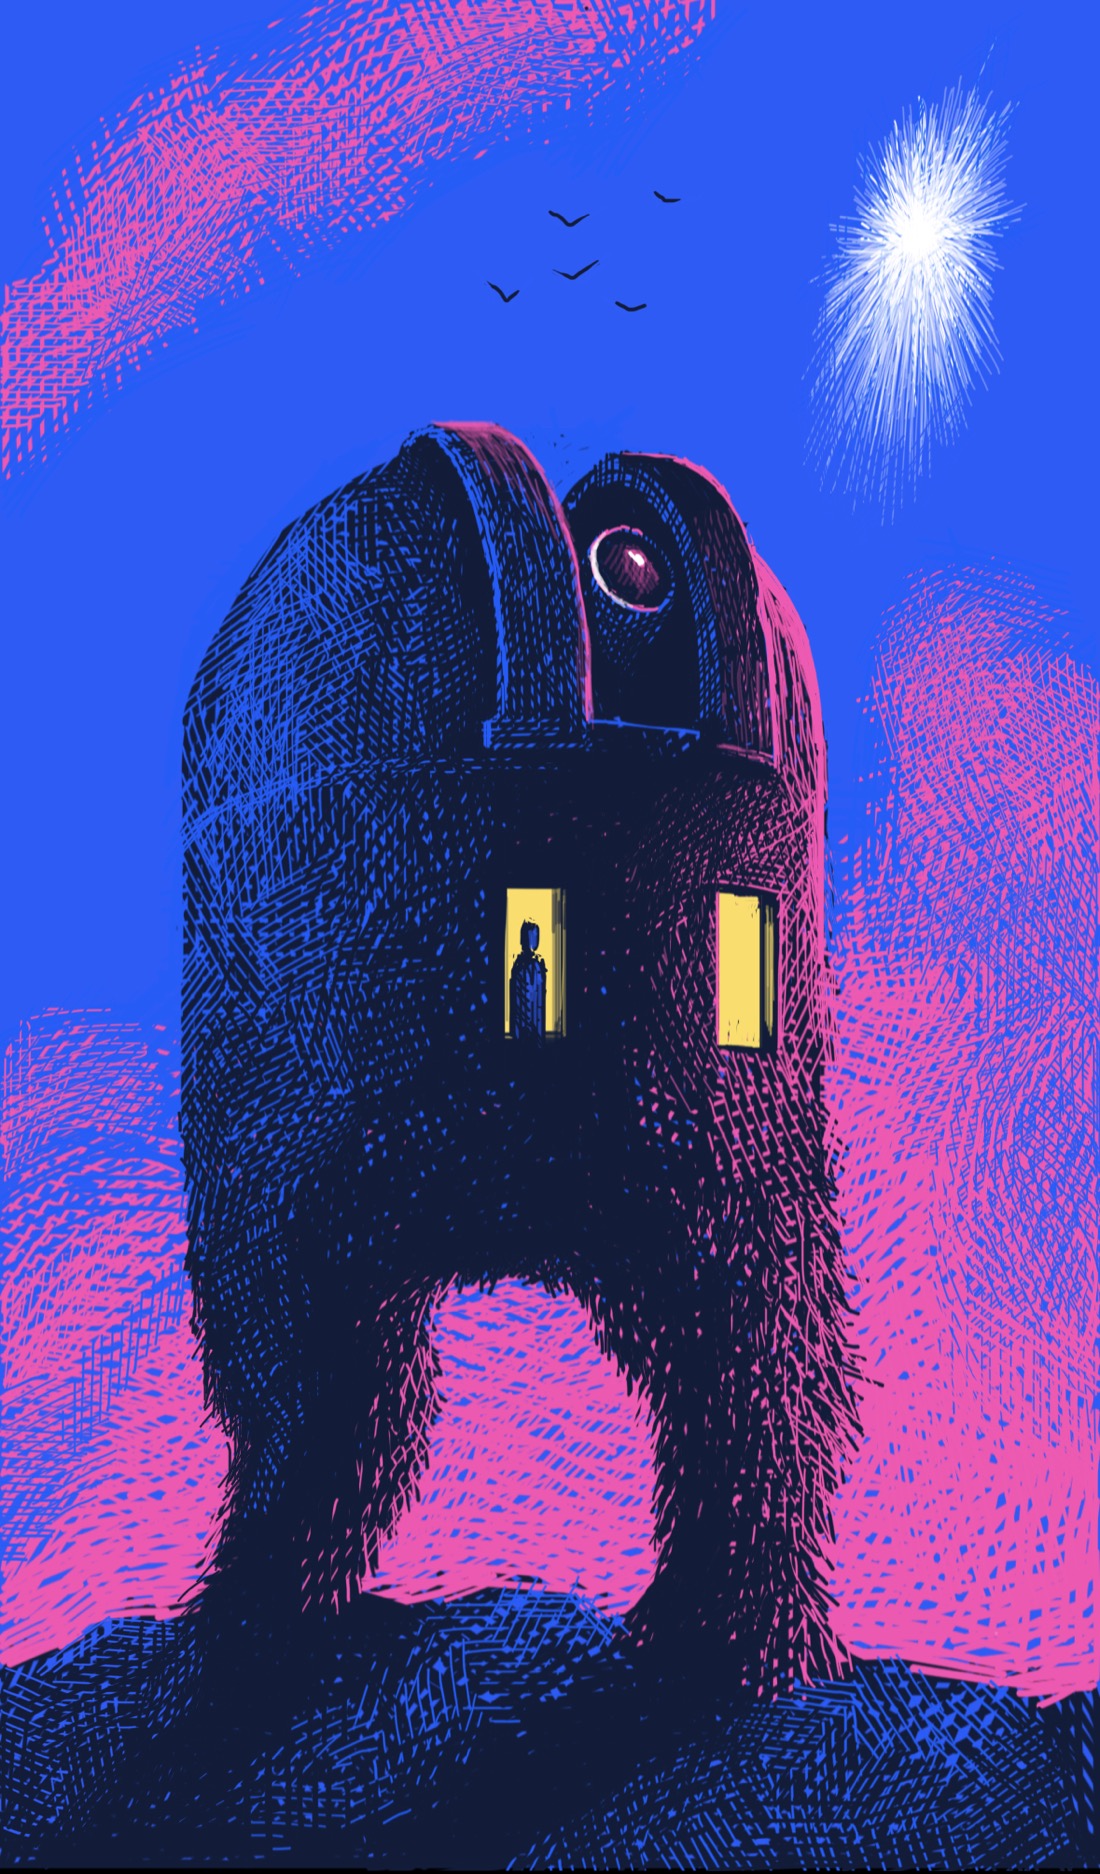 A giant observatory with two furry legs stands astride a rocky landscape at either dawn or dusk. The horizon is crimson, with pink clouds. The observatory's dome doors are open, telescope fixed on a blazing white object in the sky.